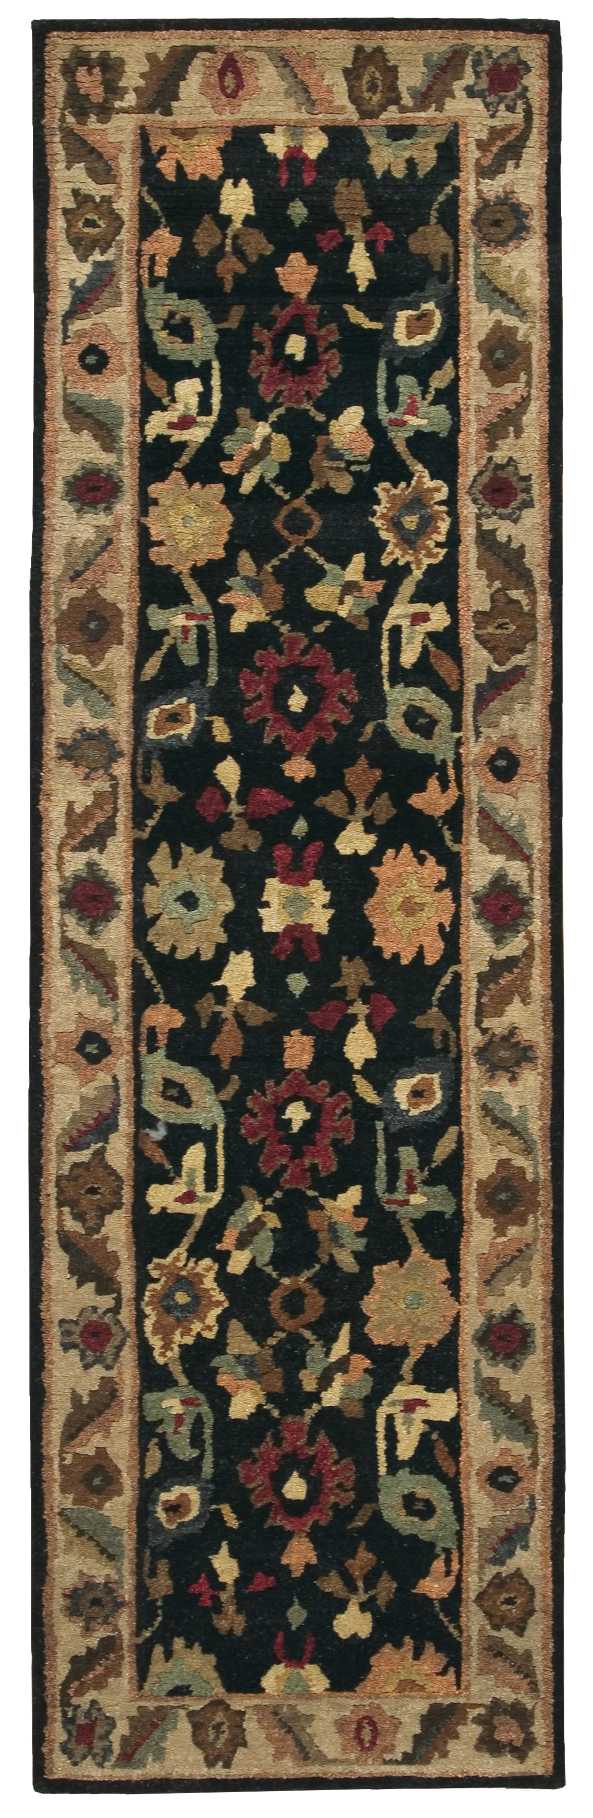 Nourison Home Tahoe TA08 Black Traditional Knotted Rug